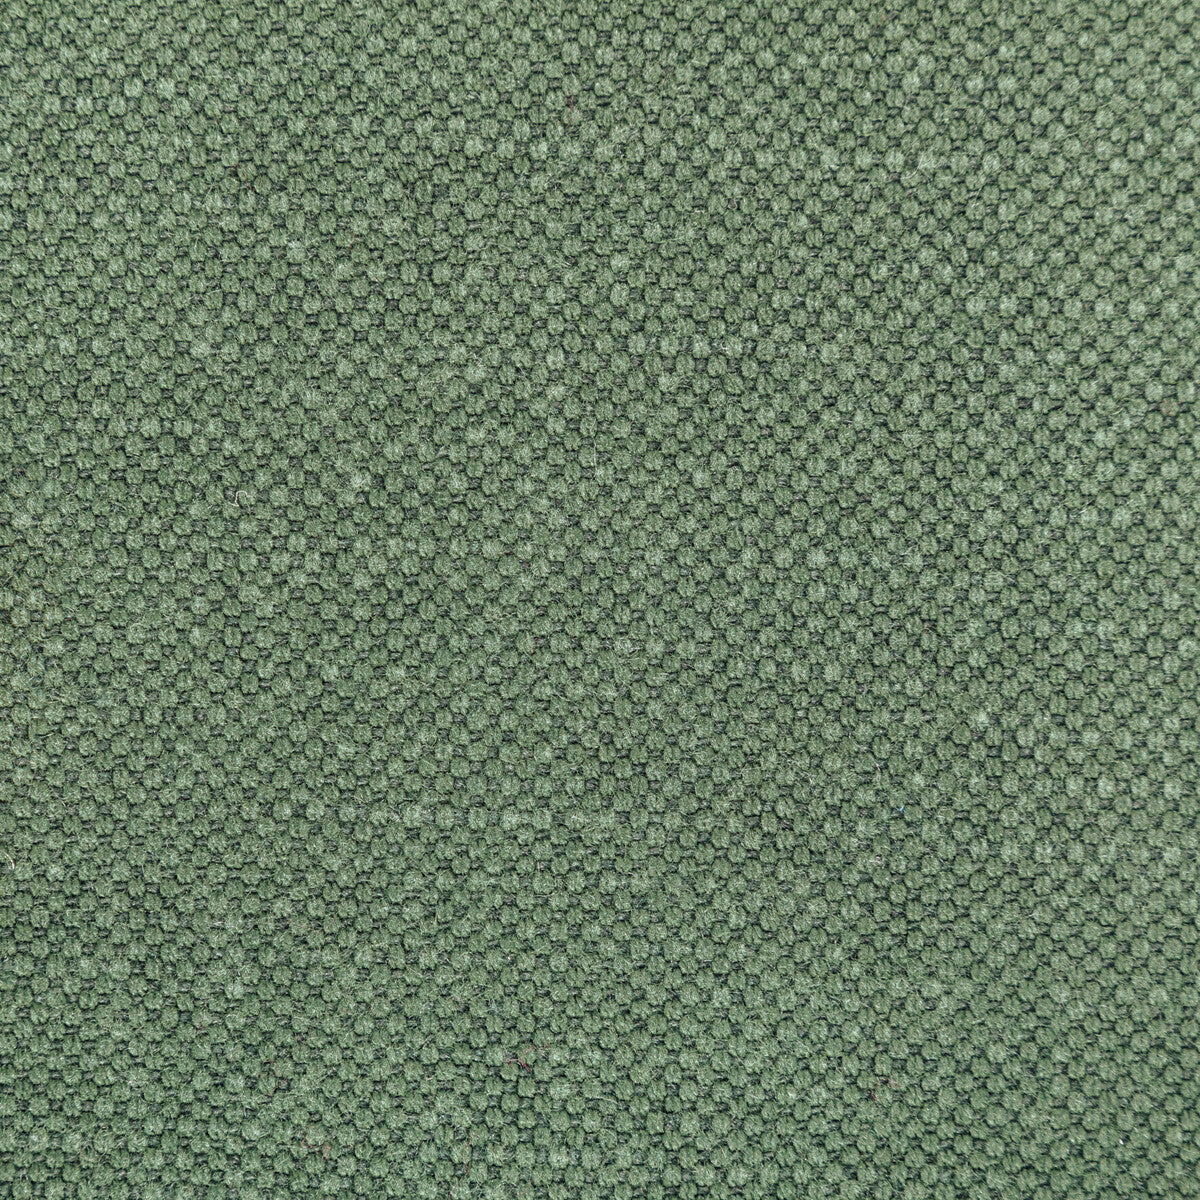 Carson fabric in relish color - pattern 36282.3535.0 - by Kravet Basics